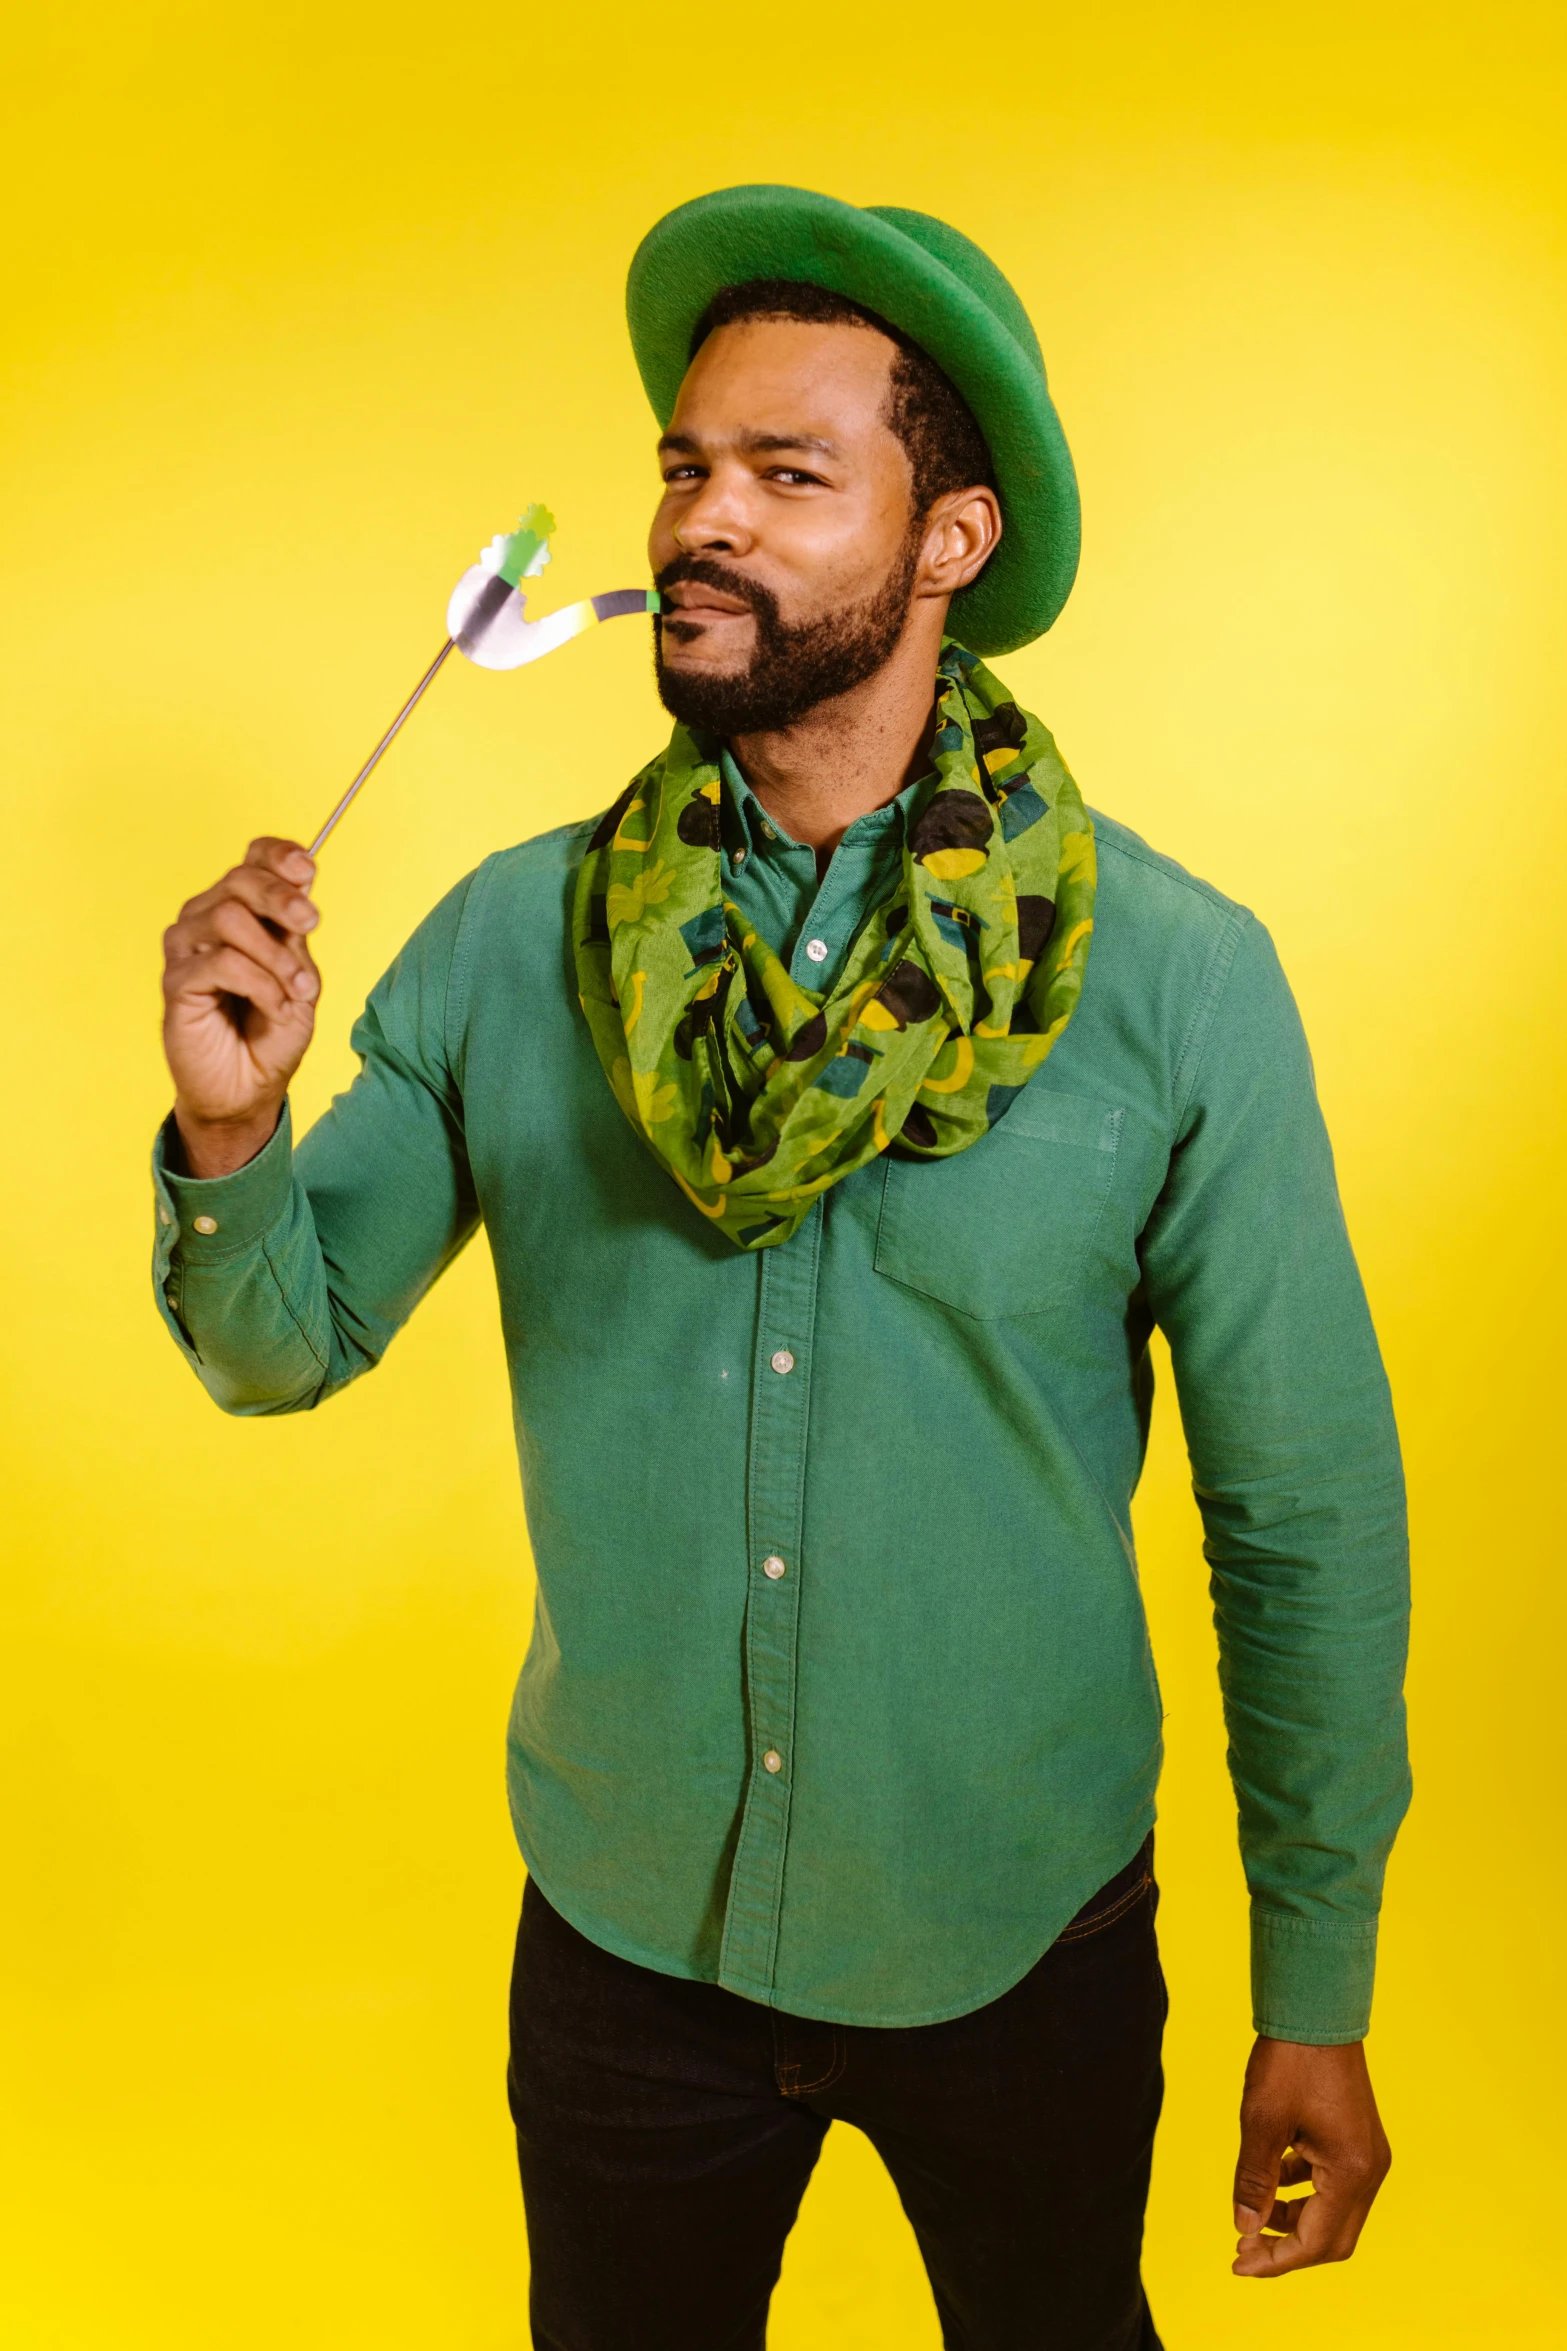 a man with a green hat, sweater and scarf is holding a toothbrush